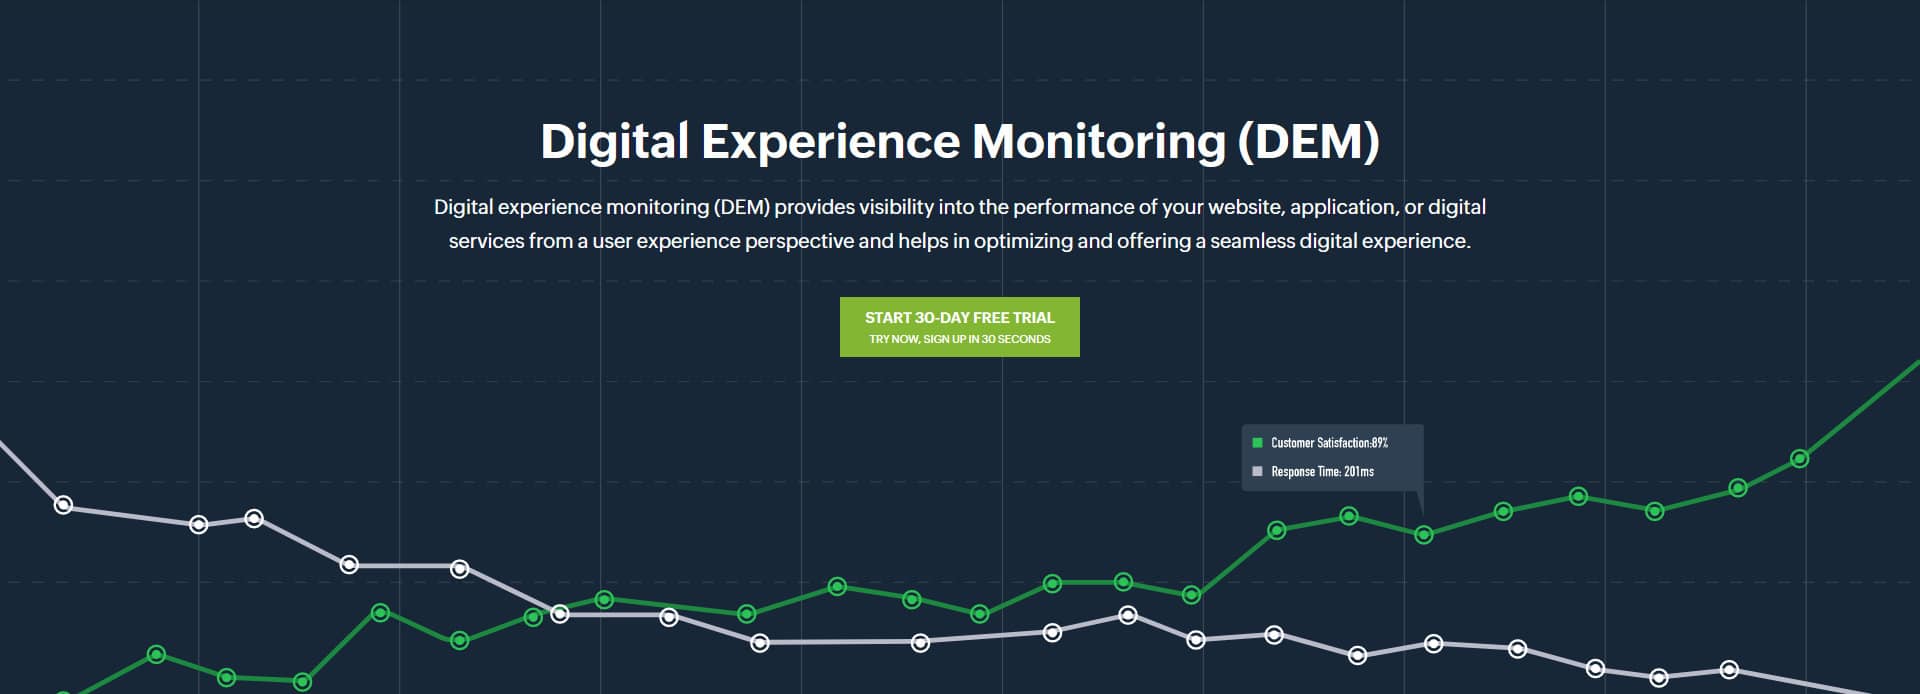 Site24x7 Digital Experience Monitoring Tool